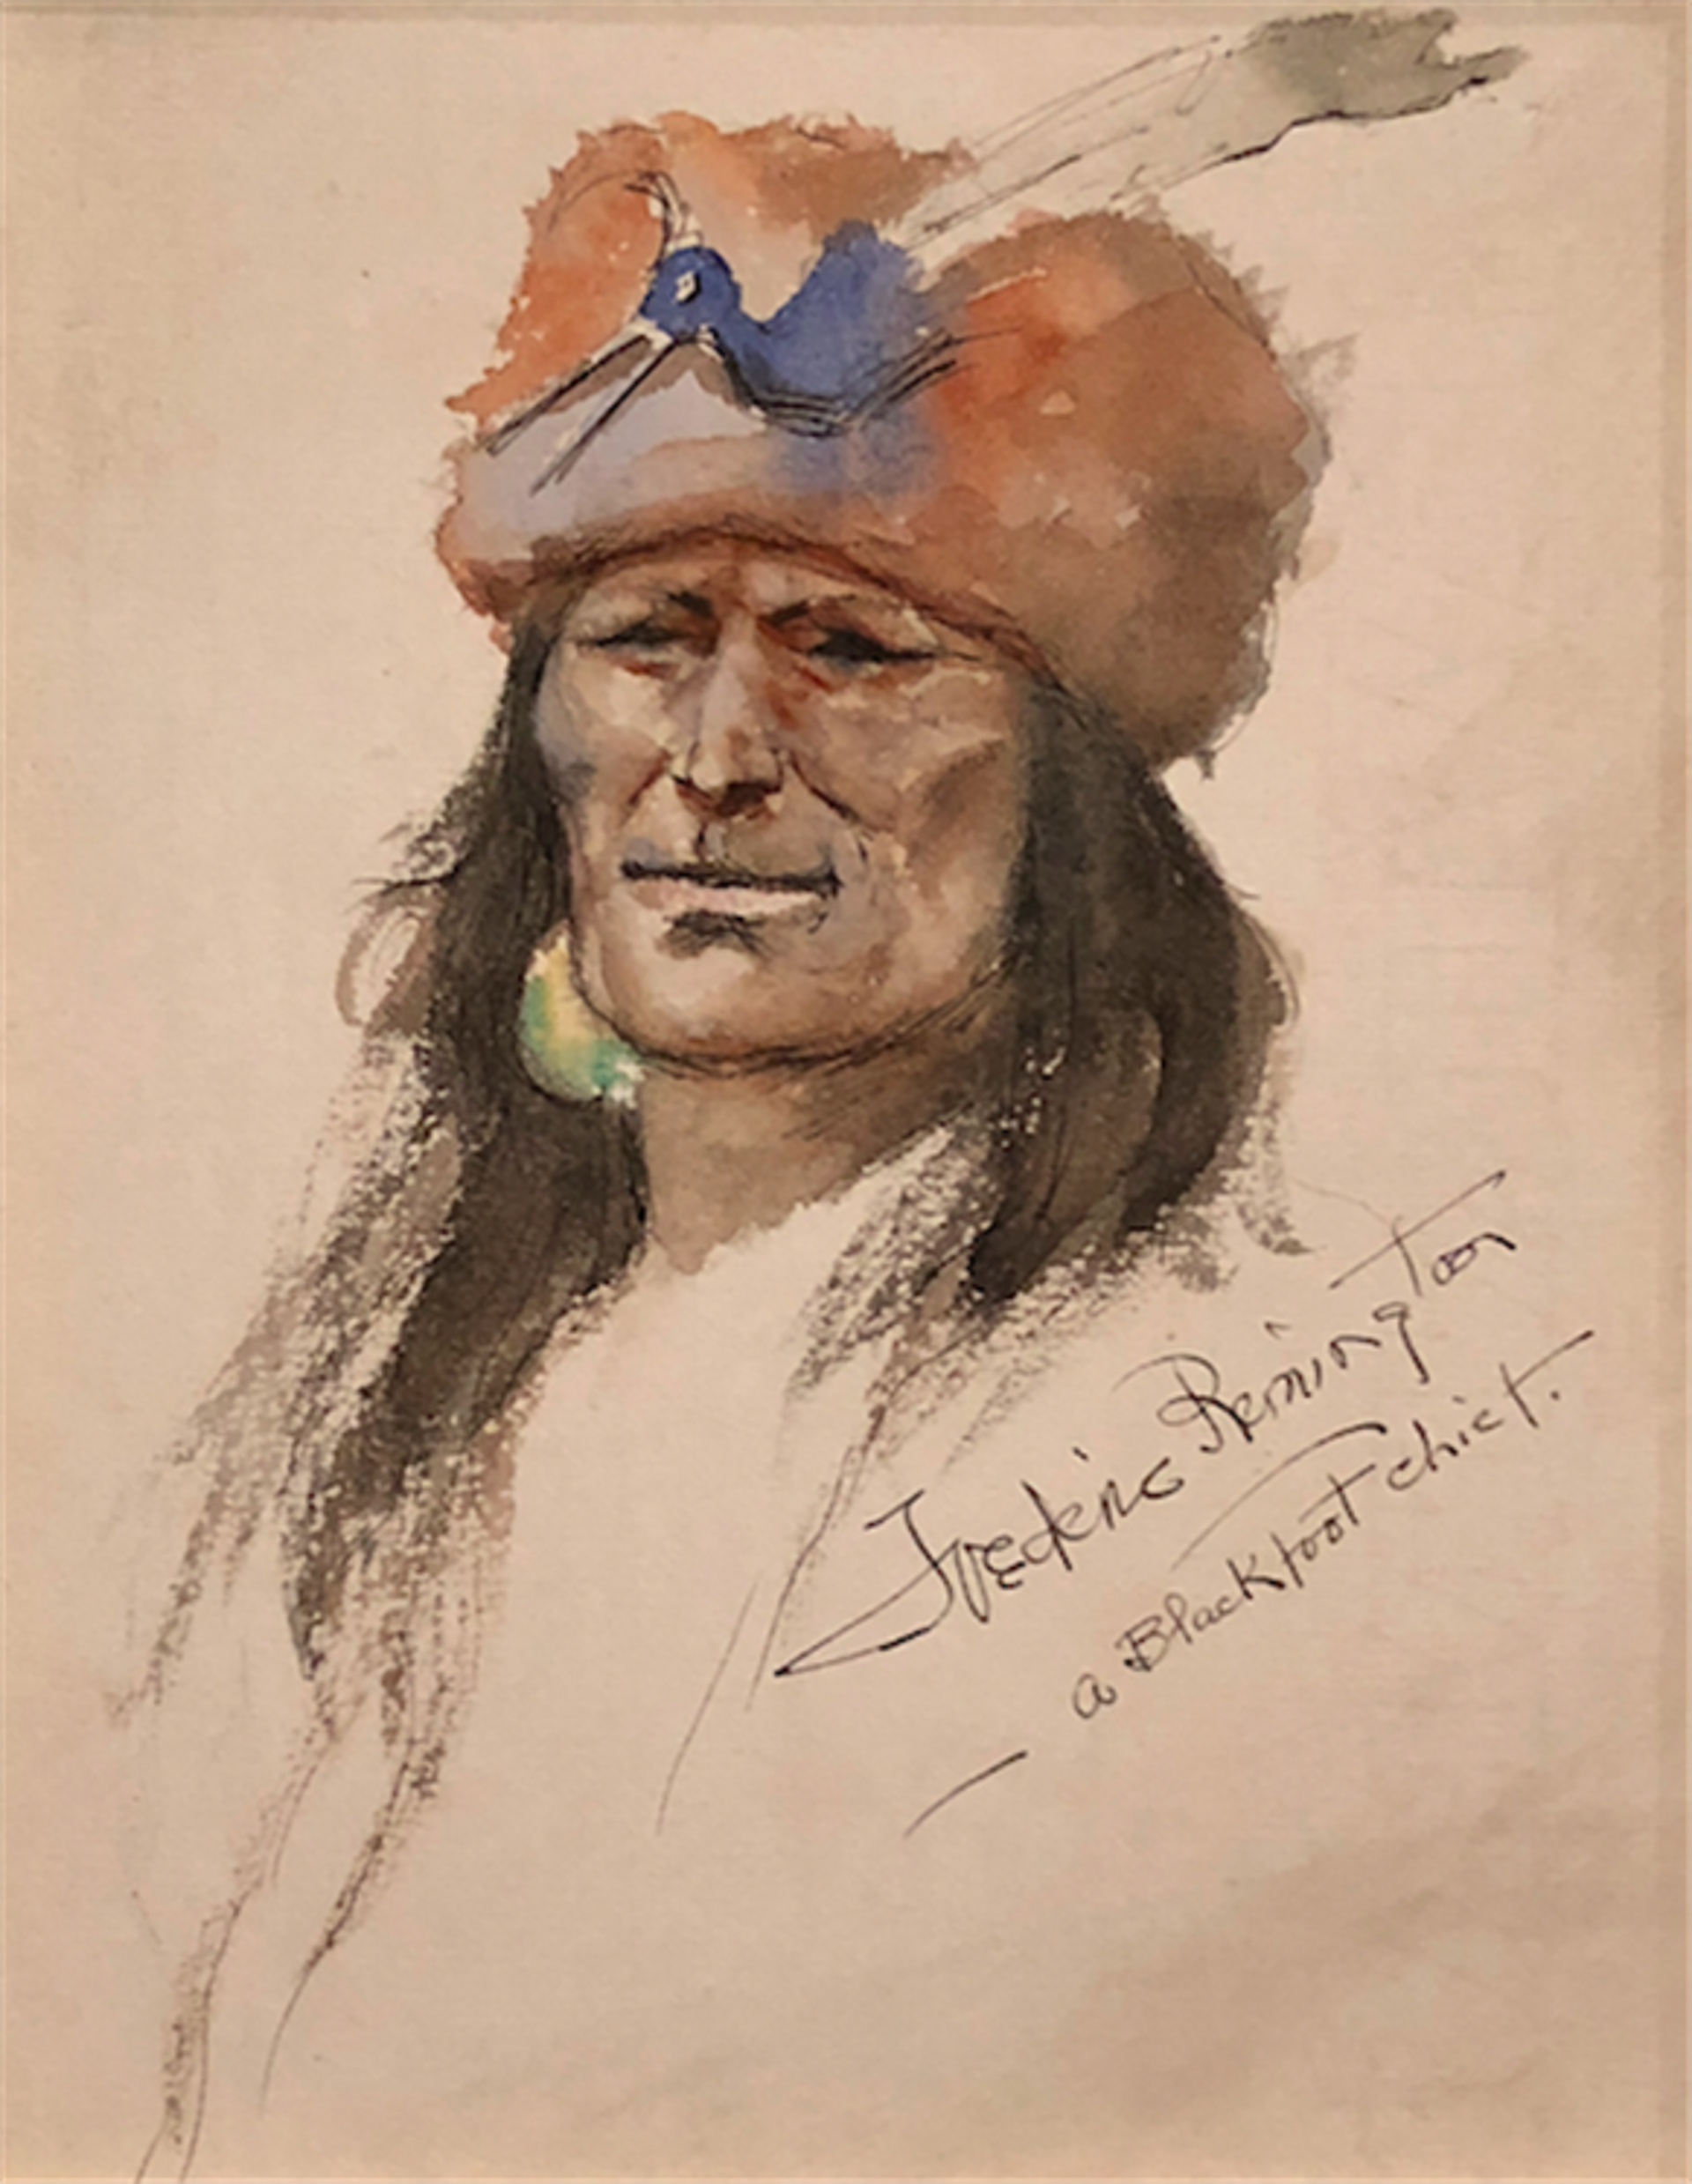 BLACKFOOT CHIEF by Frederic Remington [1861-1909]